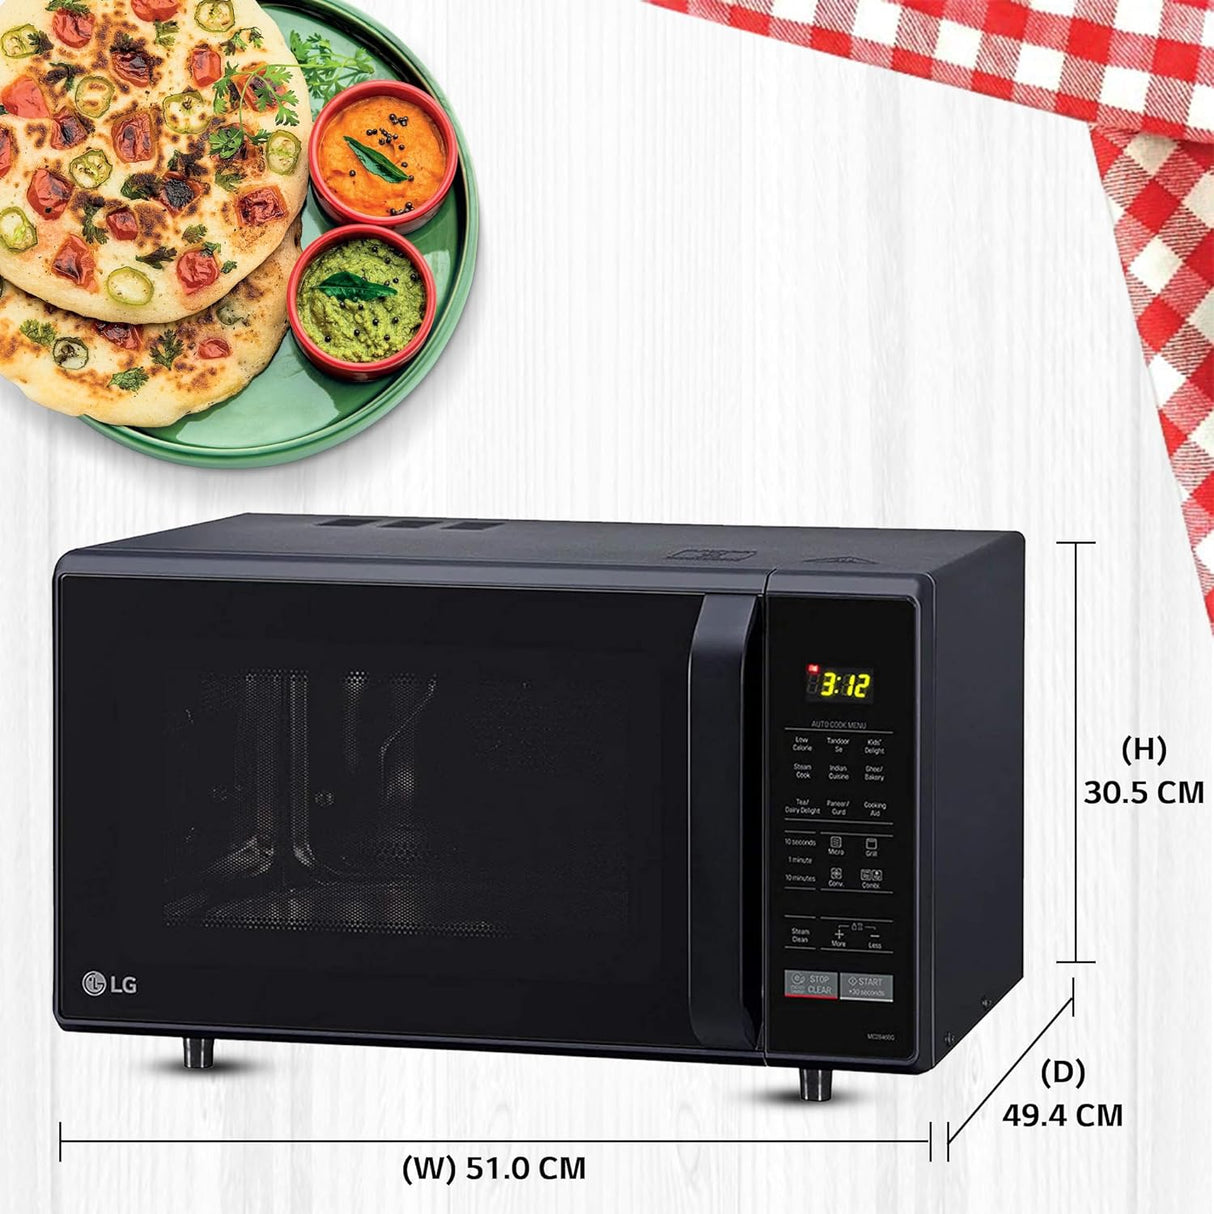 Best Microwave: LG 28 L Convection Microwave Oven - Advanced Cooking Technology